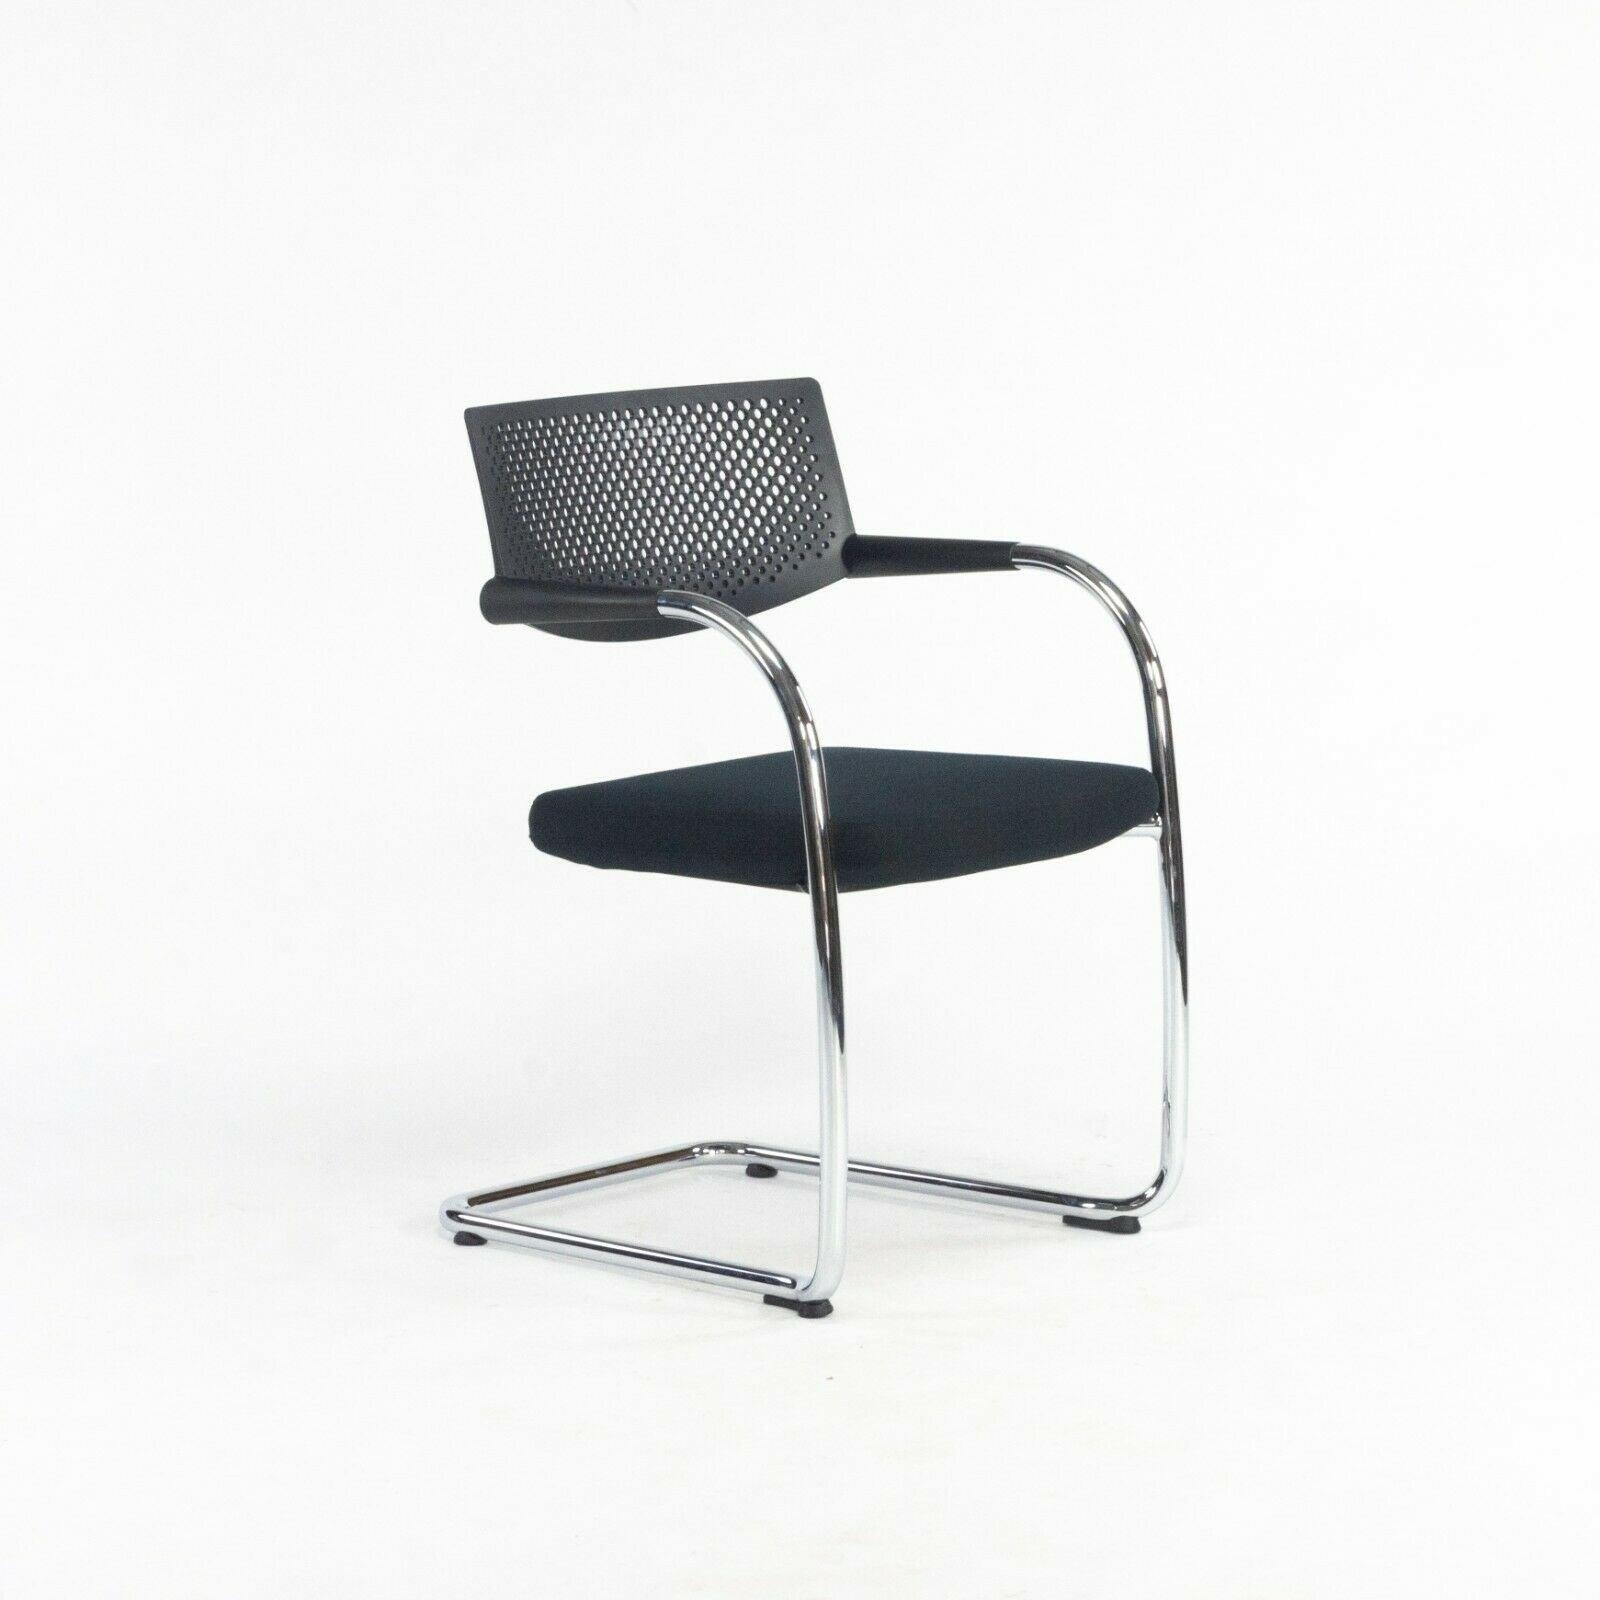 Listed for sale is an Antonio Citterio & Glen Oliver Low for Vitra 